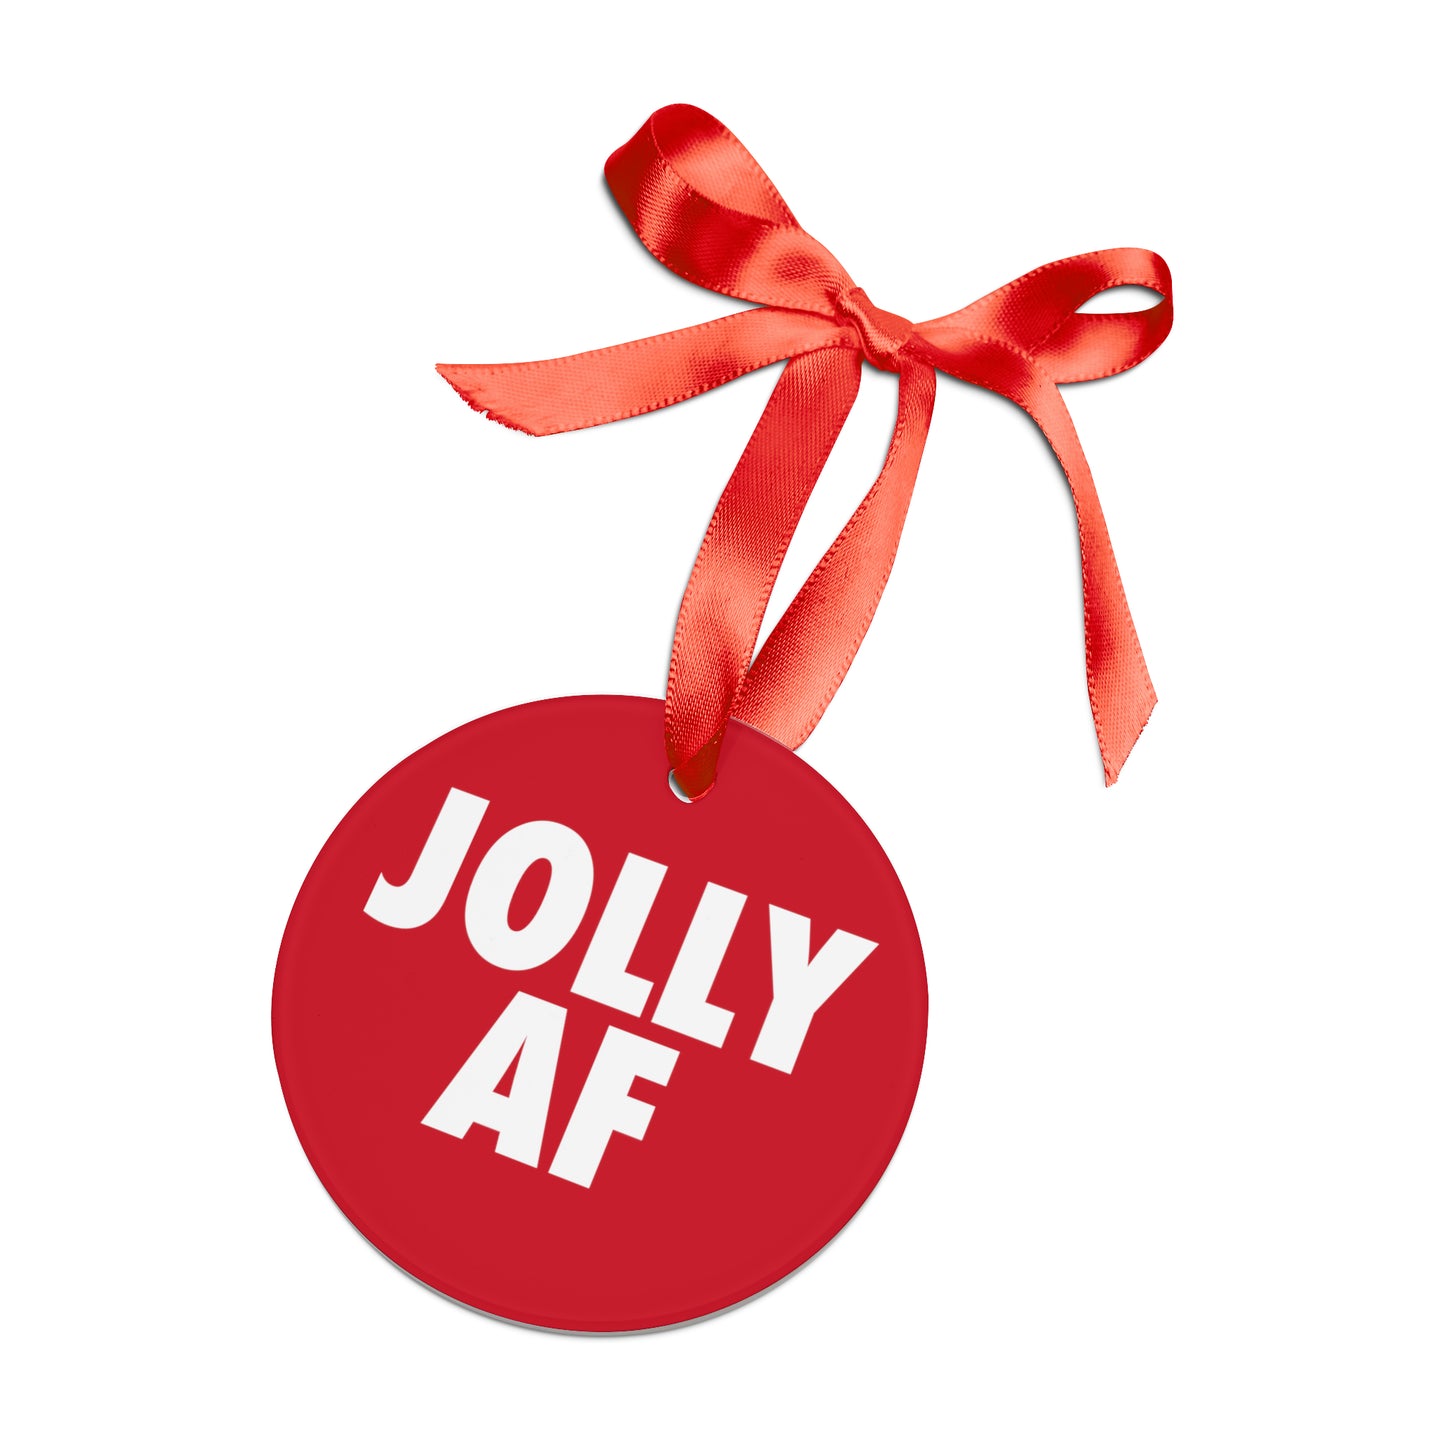 JOLLY AF Acrylic Ornament with Ribbon